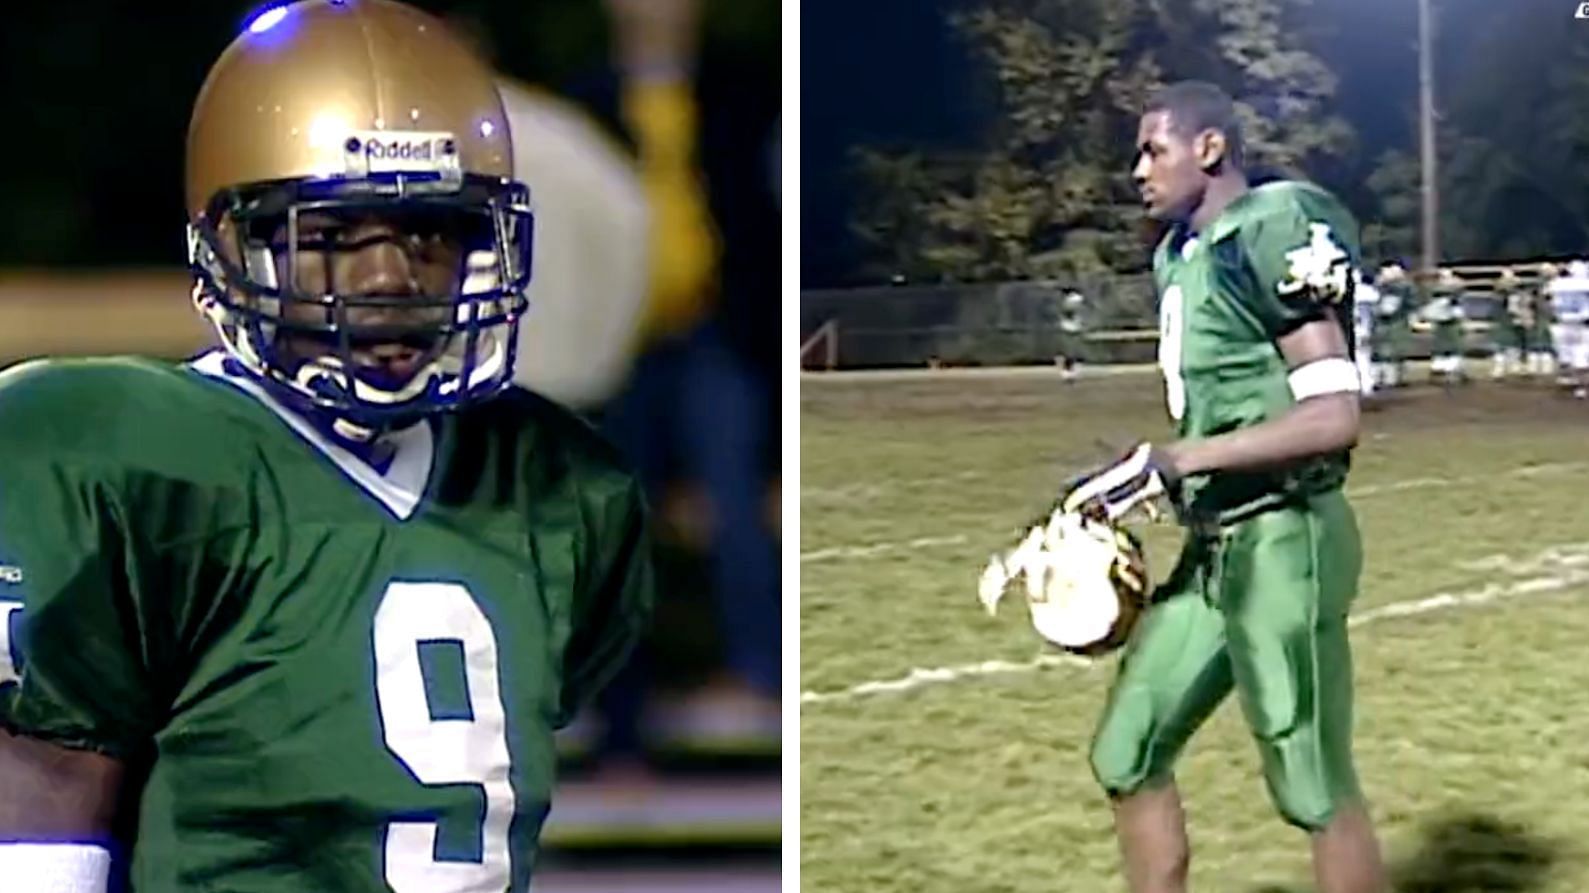 LeBron James was a star on the gridiron back in the day.